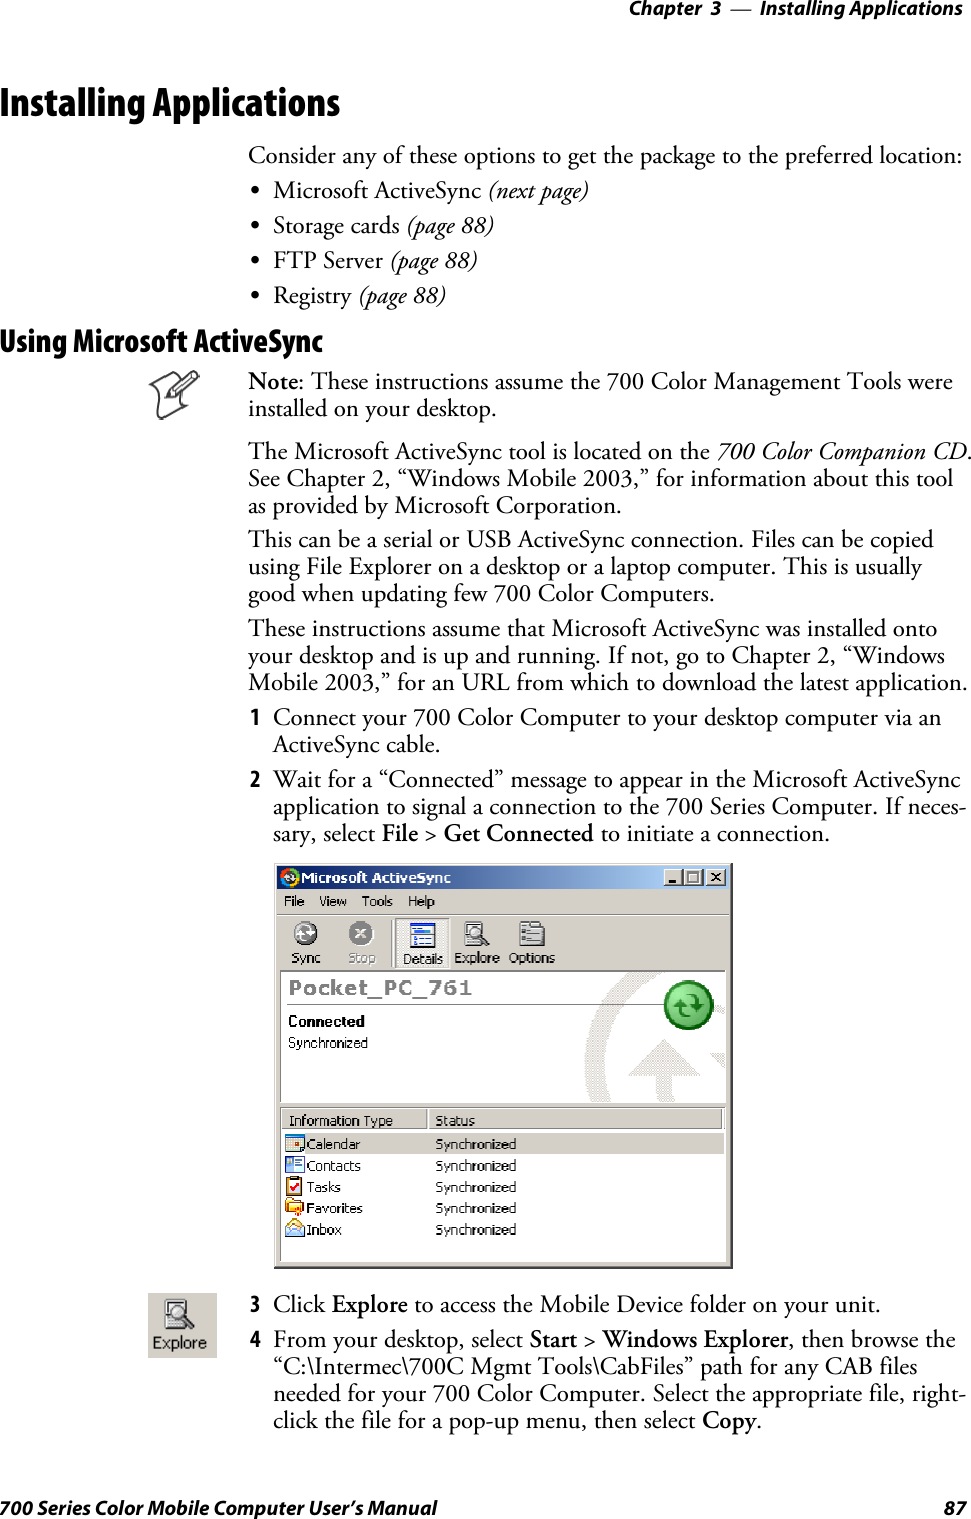 Installing Applications—Chapter 387700 Series Color Mobile Computer User’s ManualInstalling ApplicationsConsider any of these options to get the package to the preferred location:SMicrosoft ActiveSync (next page)SStorage cards (page 88)SFTP Server (page 88)SRegistry (page 88)Using Microsoft ActiveSyncNote: These instructions assume the 700 Color Management Tools wereinstalled on your desktop.The Microsoft ActiveSync tool is located on the 700 Color Companion CD.See Chapter 2, “Windows Mobile 2003,” for information about this toolas provided by Microsoft Corporation.This can be a serial or USB ActiveSync connection. Files can be copiedusing File Explorer on a desktop or a laptop computer. This is usuallygood when updating few 700 Color Computers.These instructions assume that Microsoft ActiveSync was installed ontoyour desktop and is up and running. If not, go to Chapter 2, “WindowsMobile 2003,” for an URL from which to download the latest application.1Connect your 700 Color Computer to your desktop computer via anActiveSync cable.2Wait for a “Connected” message to appear in the Microsoft ActiveSyncapplication to signal a connection to the 700 Series Computer. If neces-sary, select File &gt;Get Connected to initiate a connection.3Click Explore toaccesstheMobileDevicefolderonyourunit.4From your desktop, select Start &gt;Windows Explorer, then browse the“C:\Intermec\700C Mgmt Tools\CabFiles” path for any CAB filesneeded for your 700 Color Computer. Select the appropriate file, right-click the file for a pop-up menu, then select Copy.